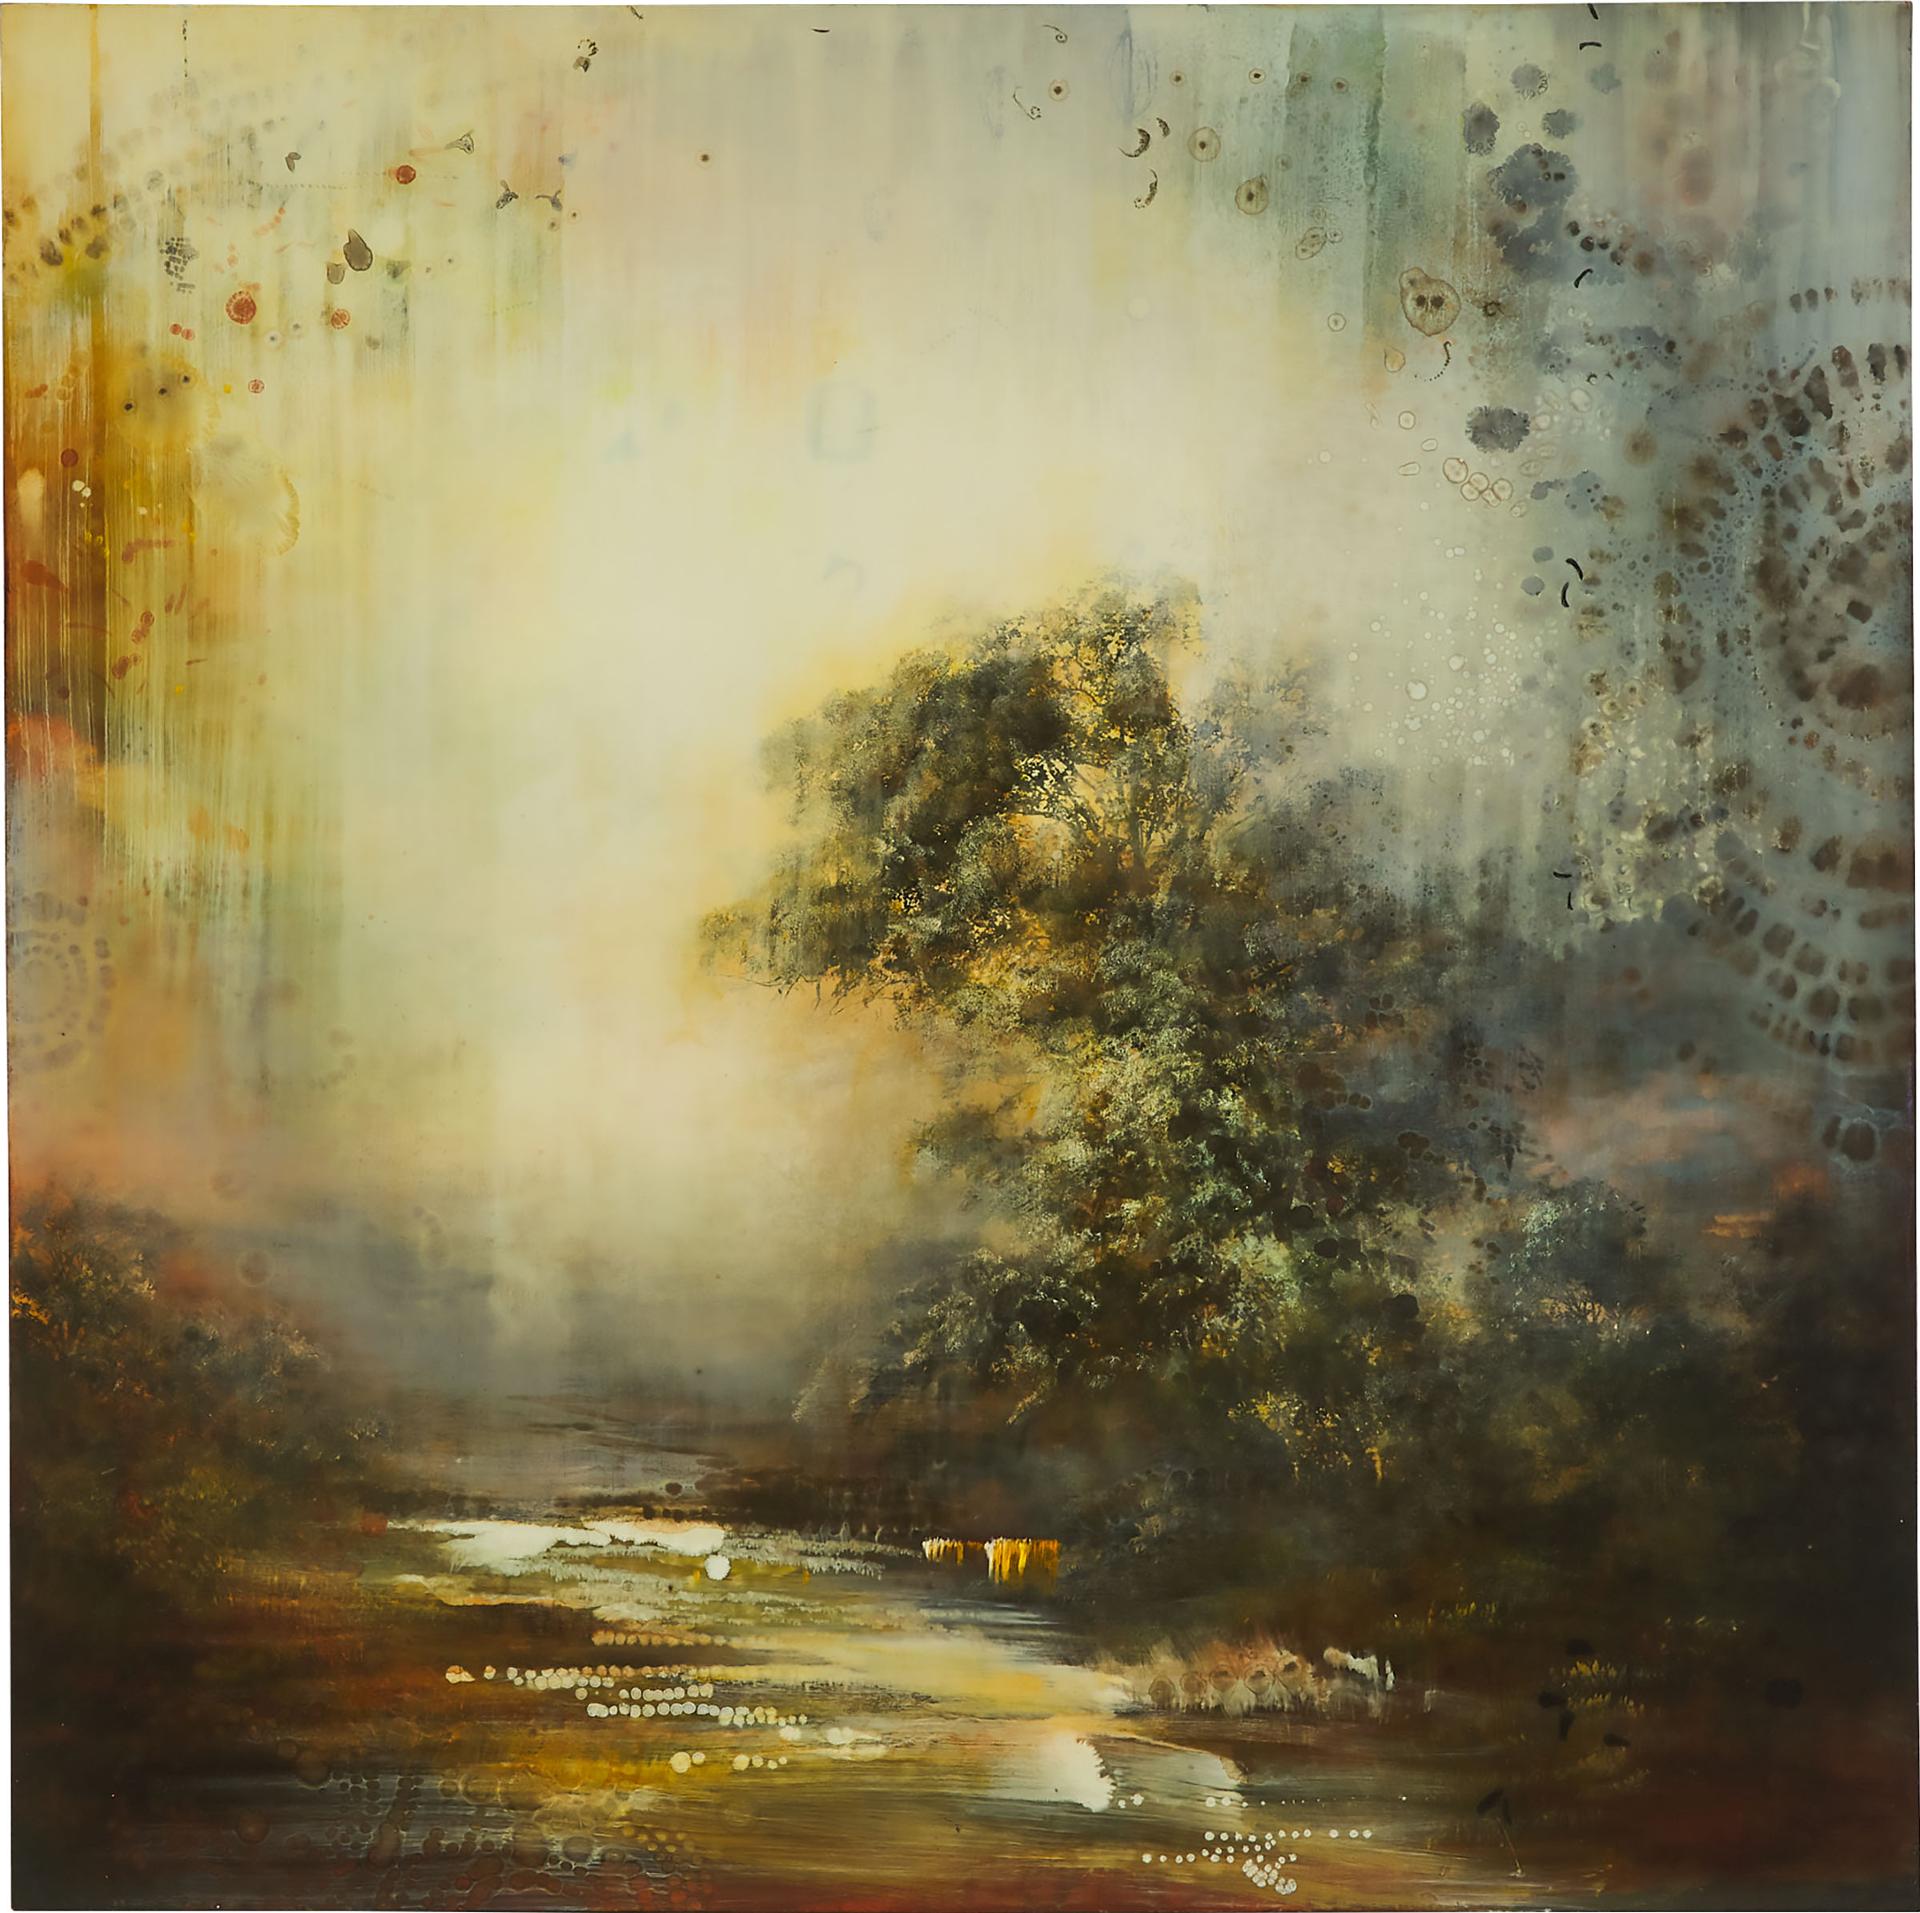 Tracey Tarling - Gathering Of Light Like Water, 2006